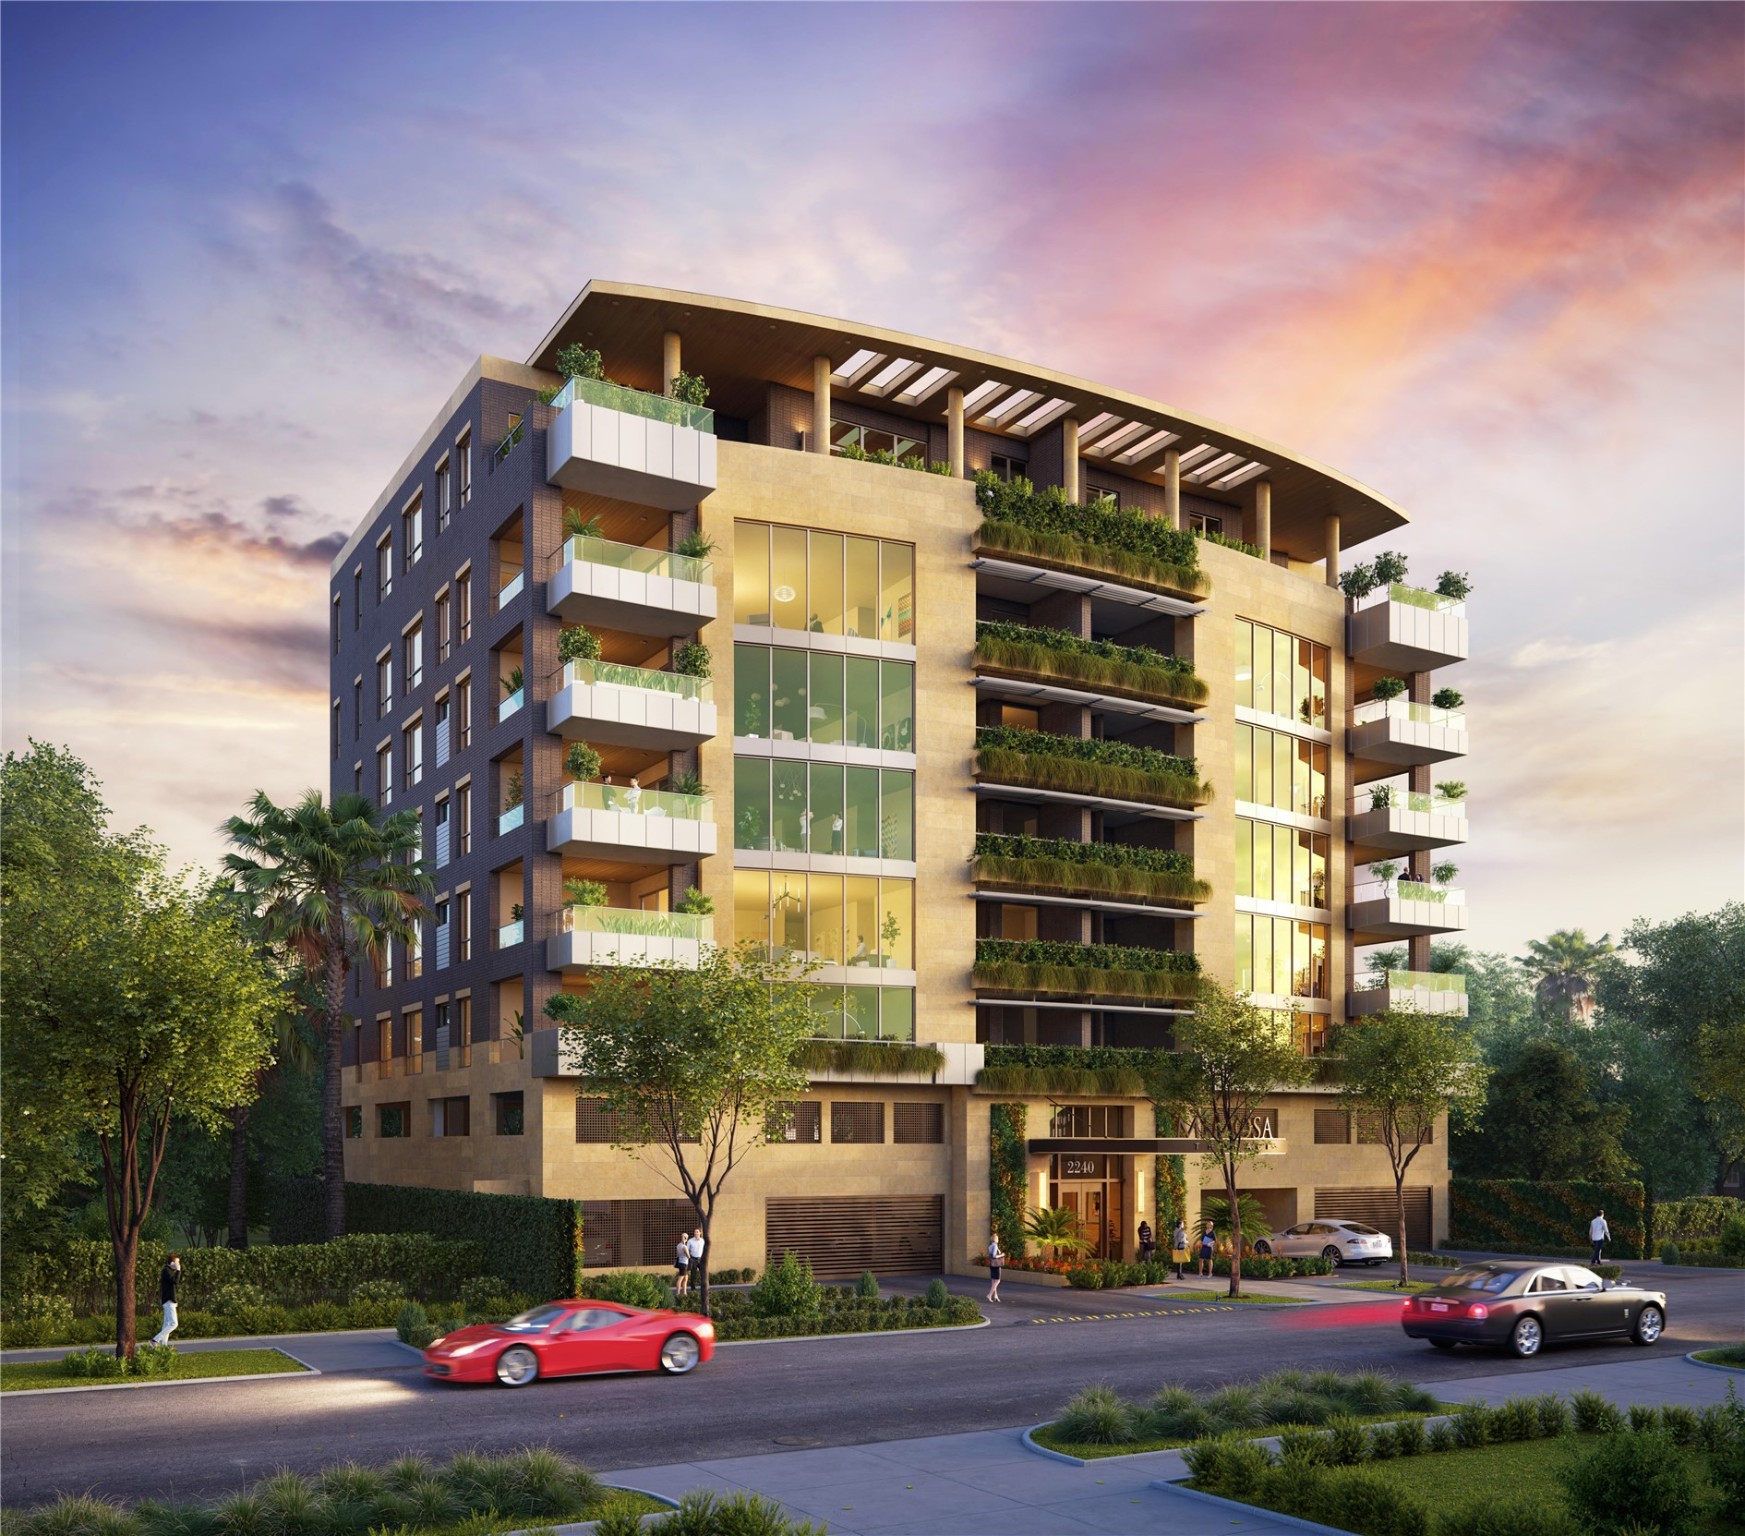 A boutique condominium with limestone exterior,floor-to-ceiling window walls, vertical gardens and expansive outdoor terraces, Mimosa Terrace is located on a quiet interior residential street in River Oaks, blending naturally into the landscape of this classic, upscale neighborhood.